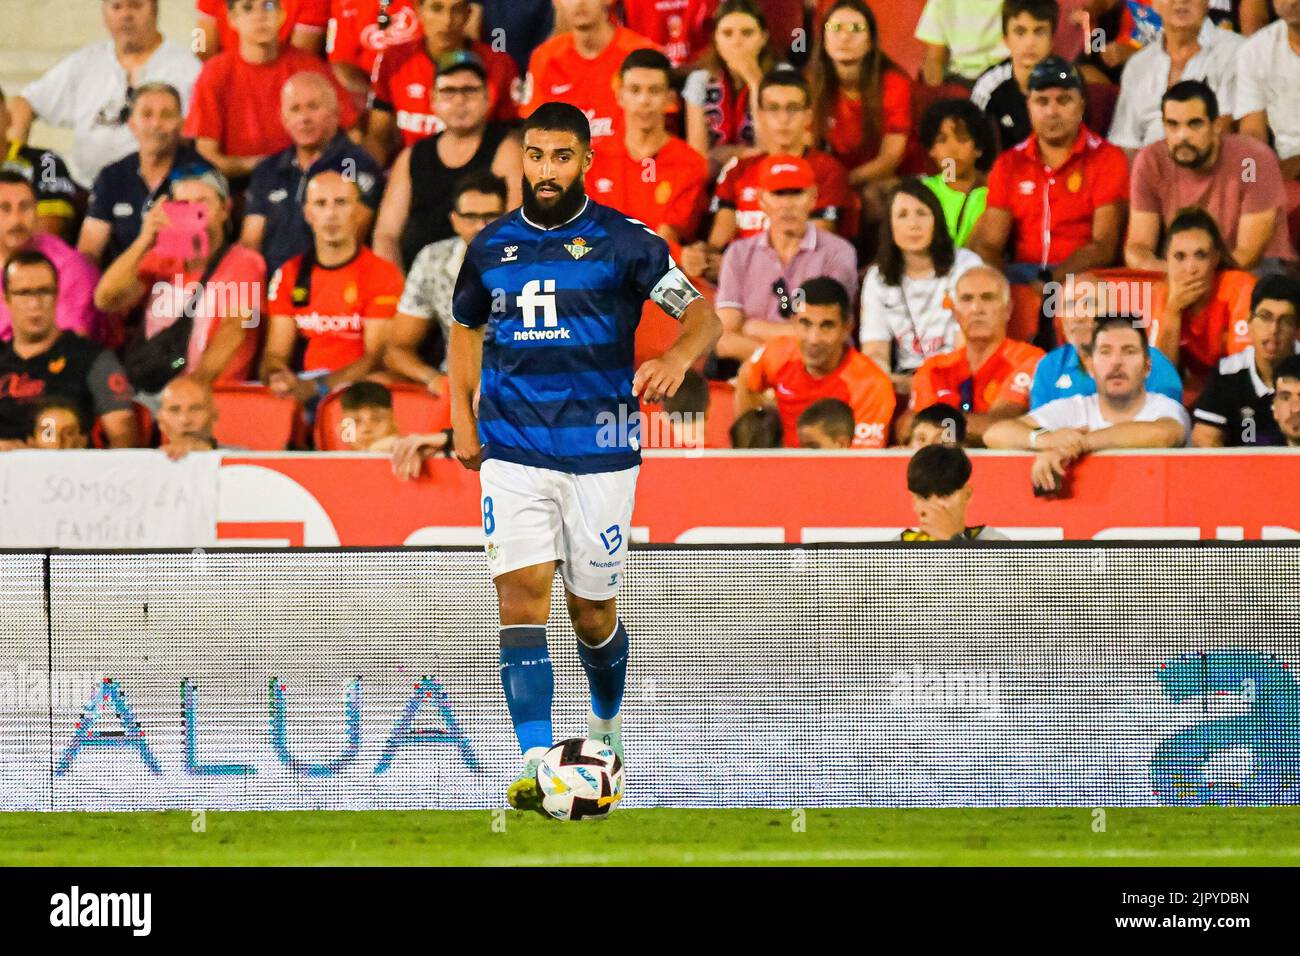 MALLORCA, SPAIN - AUGUST 20: Nabil Fekir of Real Betis in the match between RCD Mallorca and Real Betis of La Liga Santander on August 20, 2022 at Visit Mallorca Stadium Son Moix in Mallorca, Spain. (Photo by Samuel Carreño/PxImages) Stock Photo